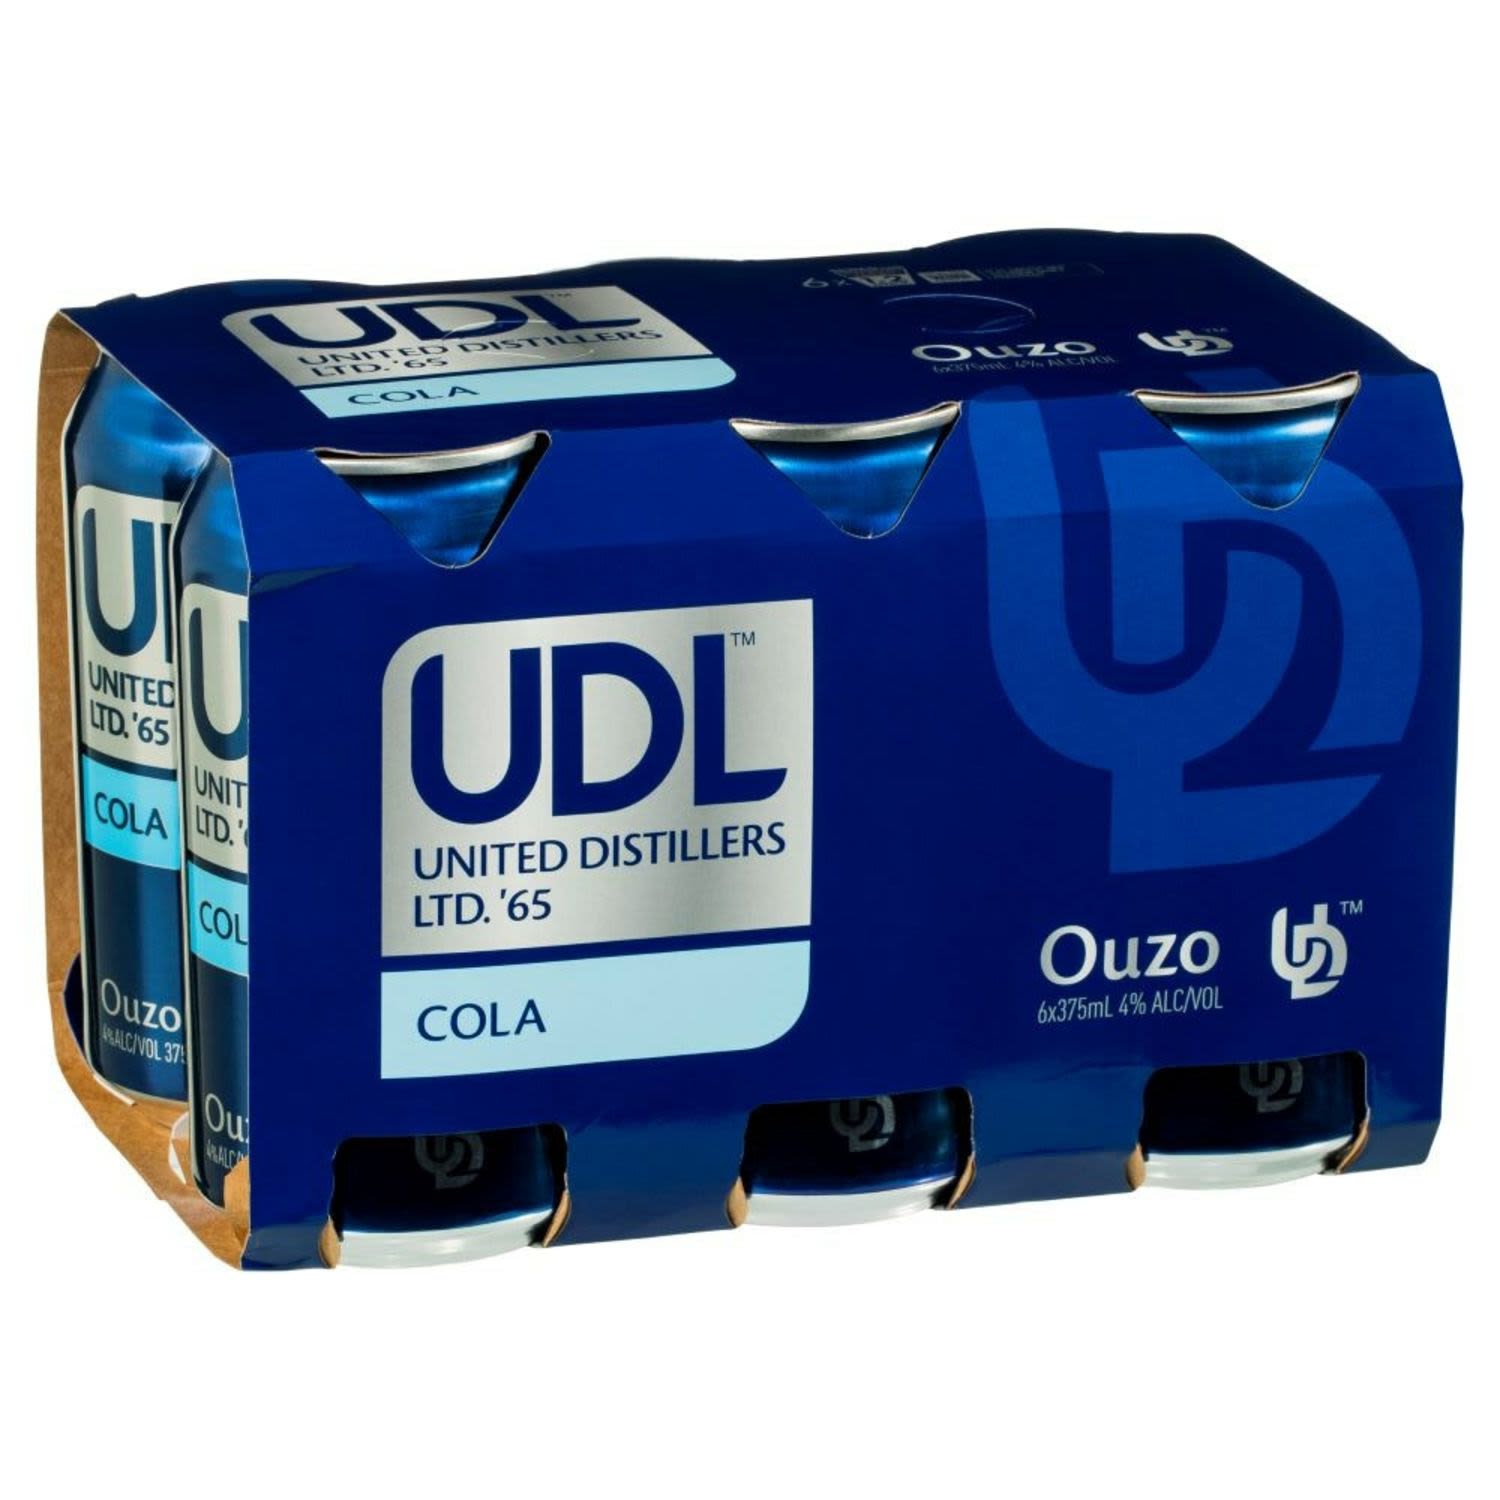 UDL Ouzo and Cola Cans 375mL<br /> <br />Alcohol Volume: 4.00%<br /><br />Pack Format: 6 Pack<br /><br />Standard Drinks: 1.3<br /><br />Pack Type: Can<br />